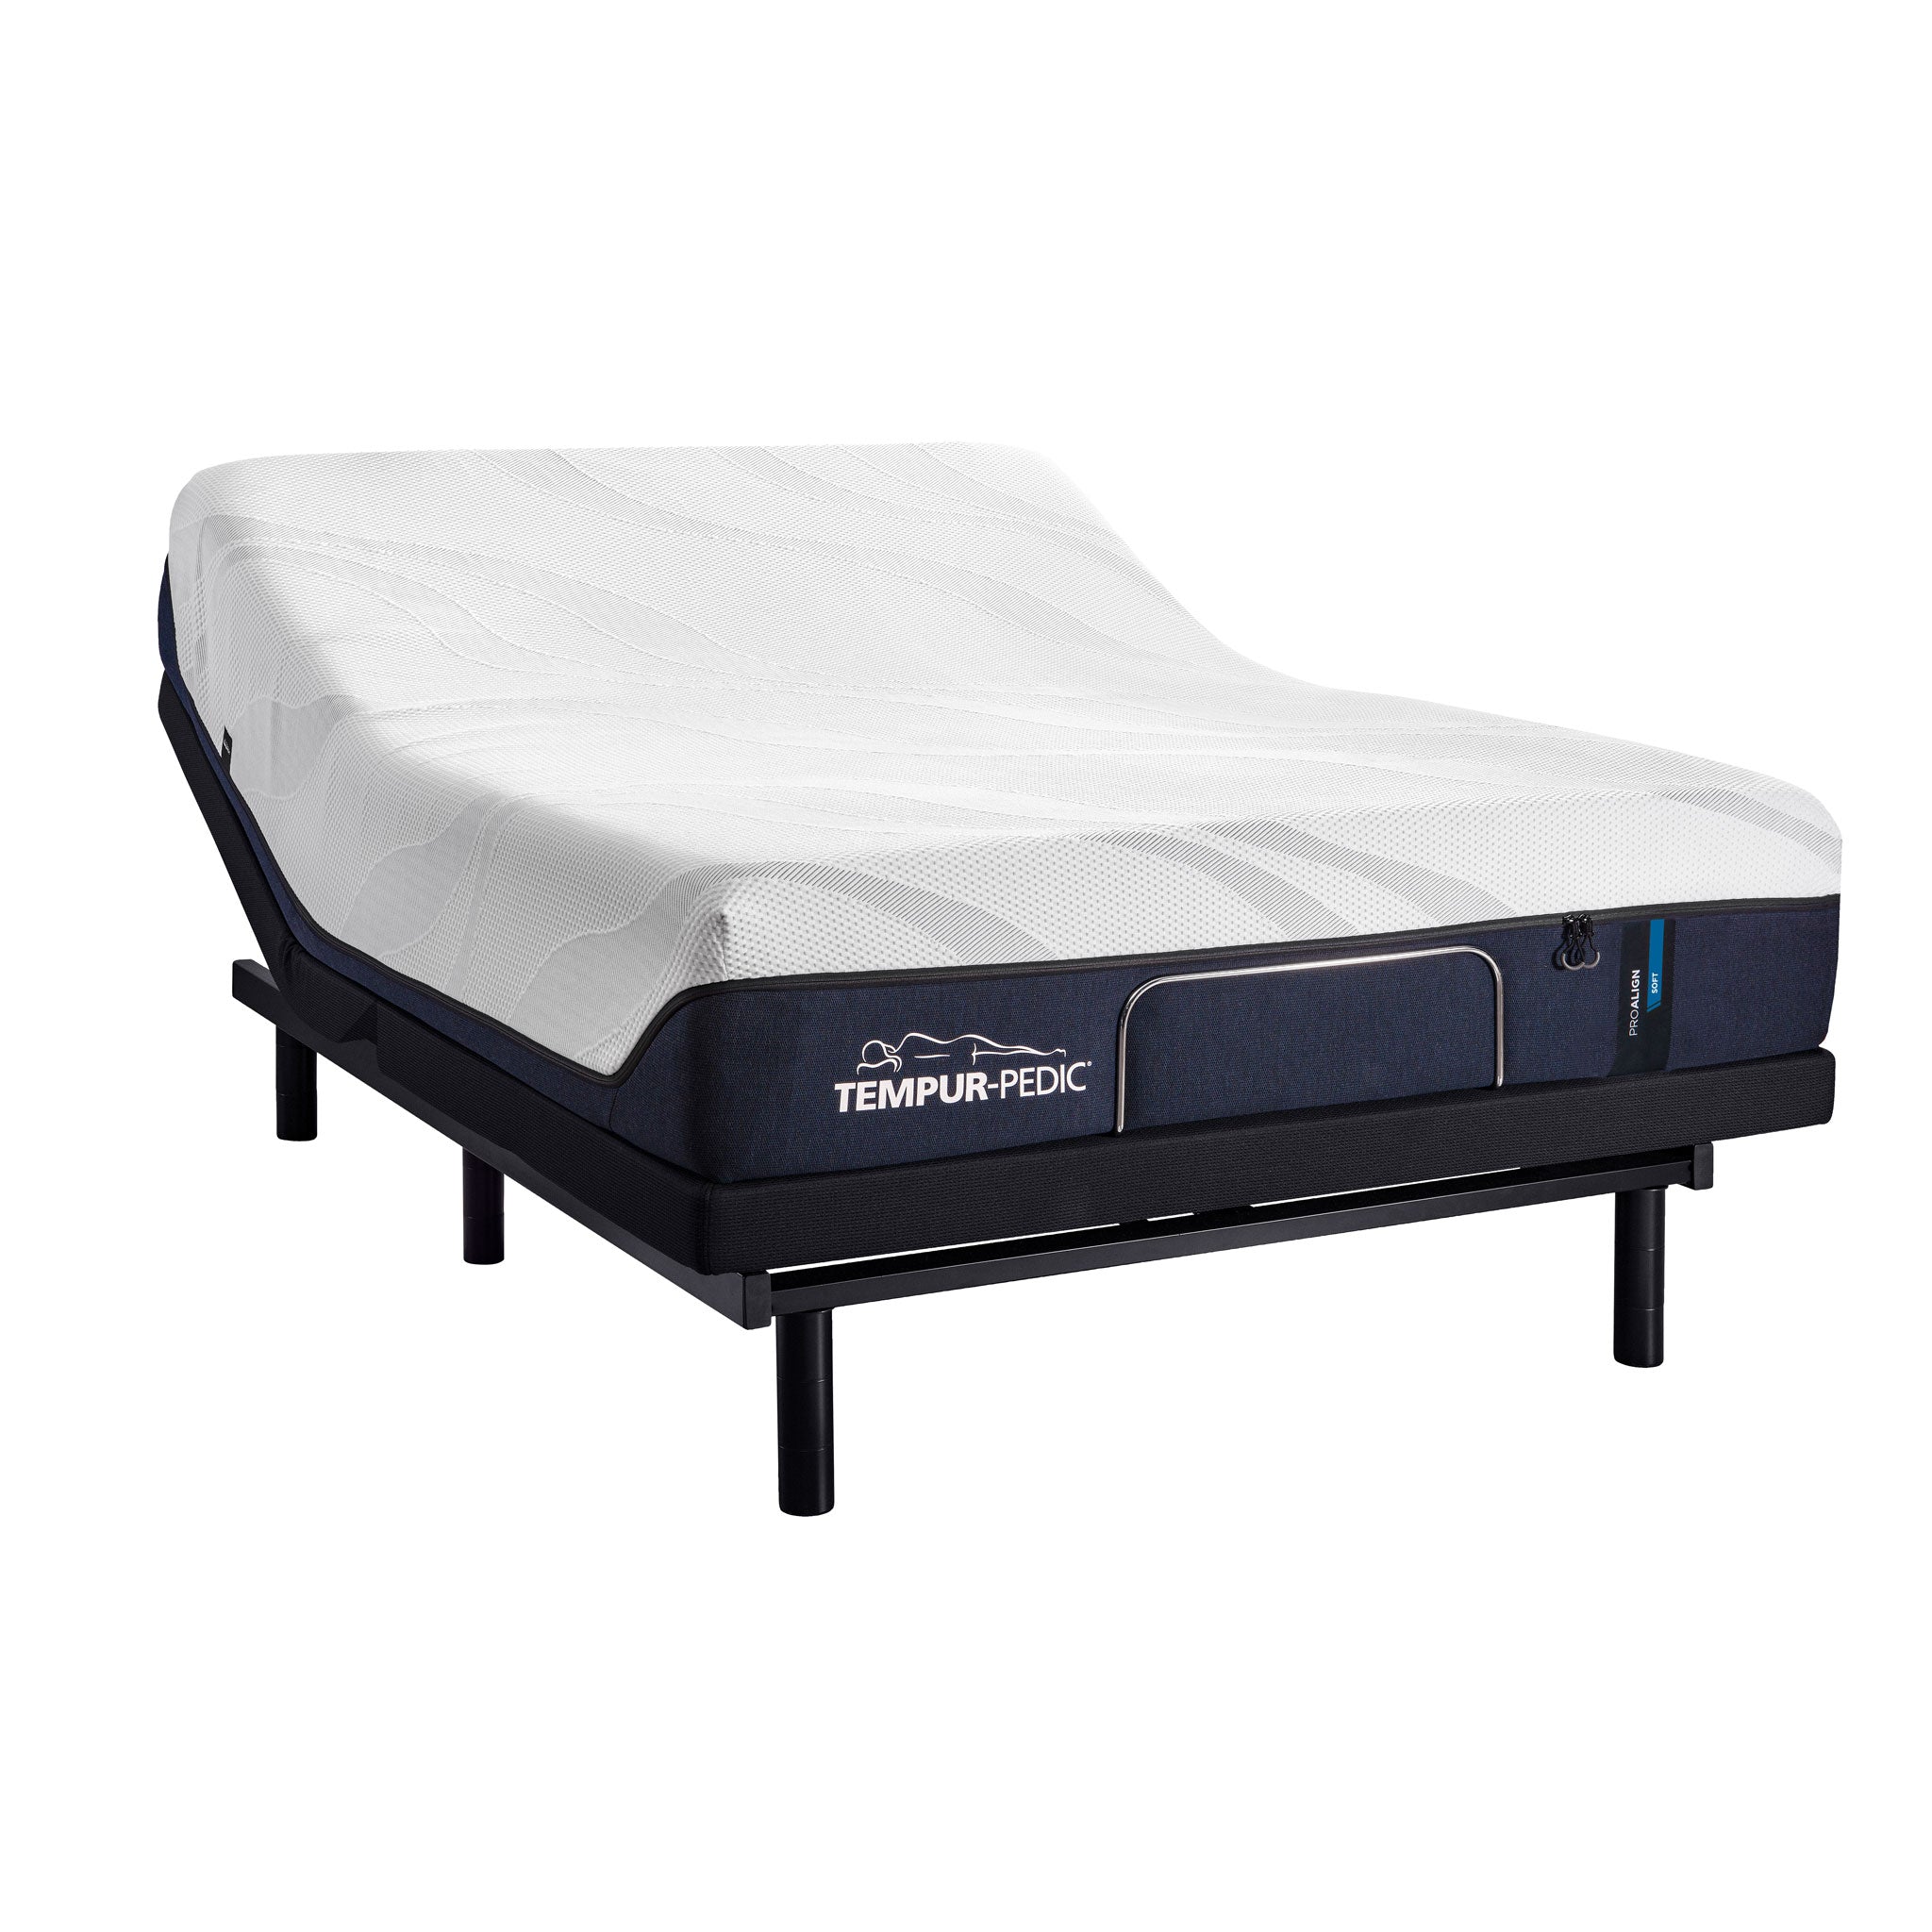 Reflexion Boost 2.0 Adjustable Bed Base by Sealy